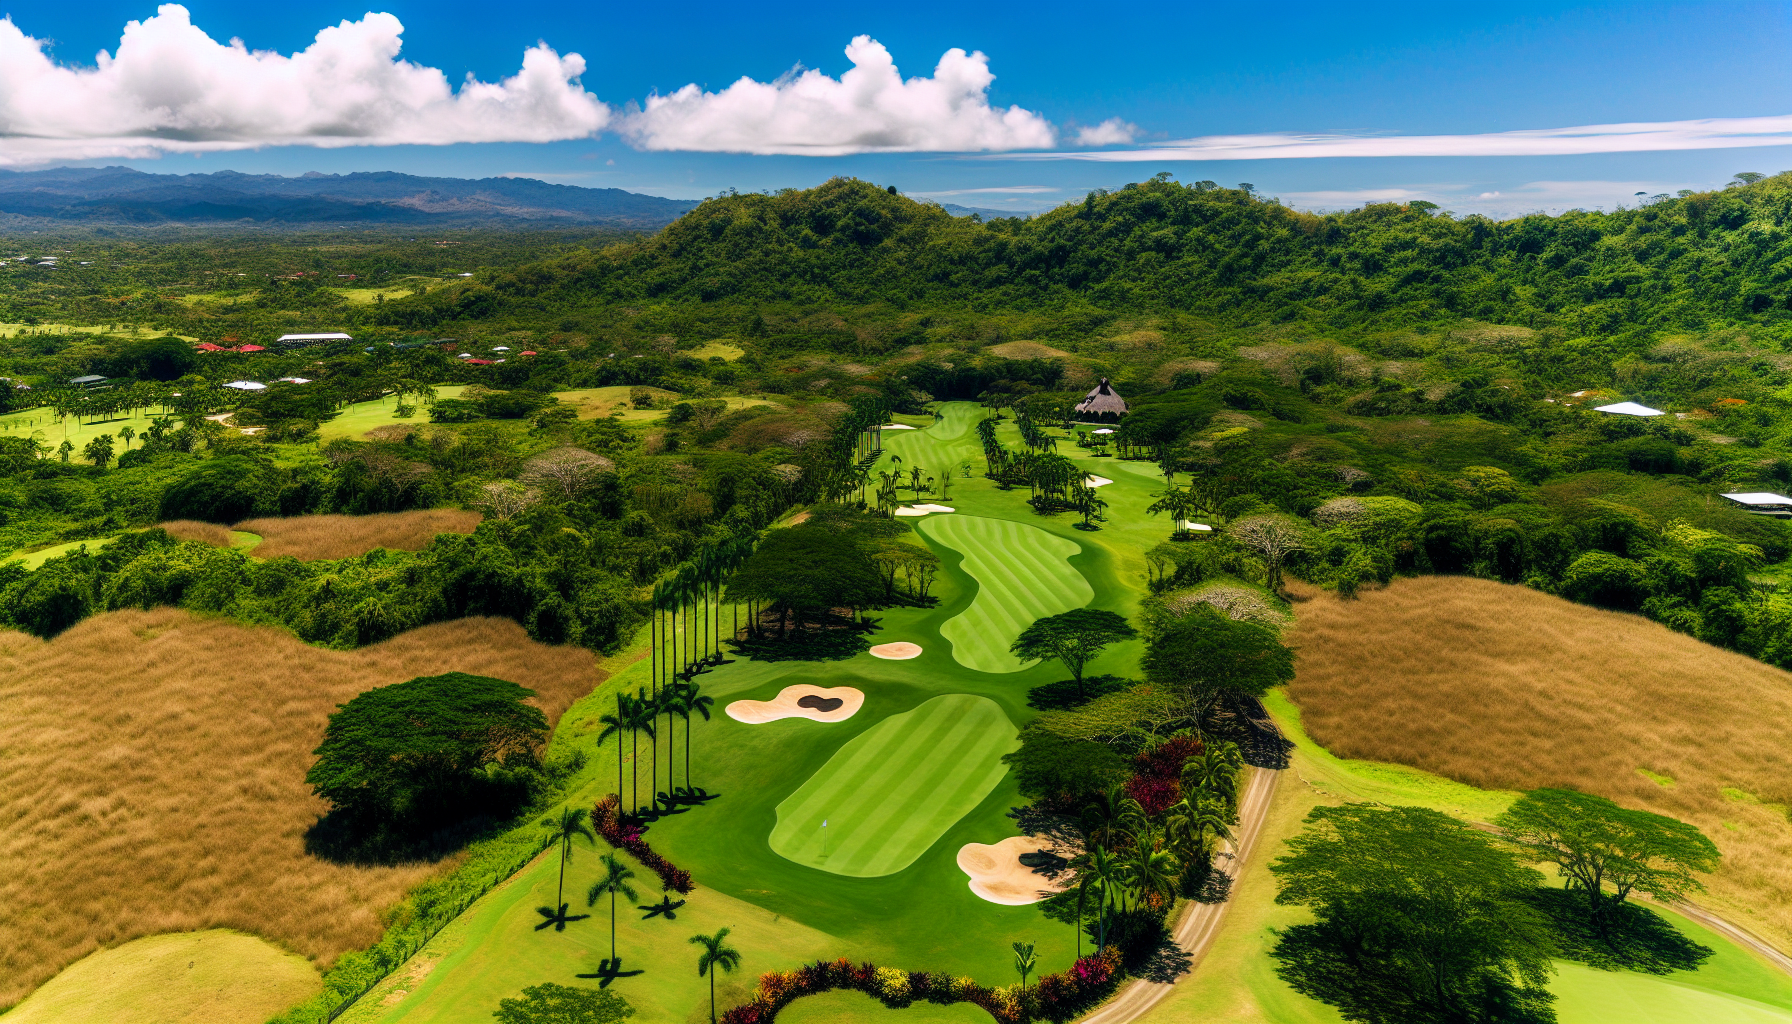 Aerial view of a lush golf course surrounded by Costa Rica's natural beauty